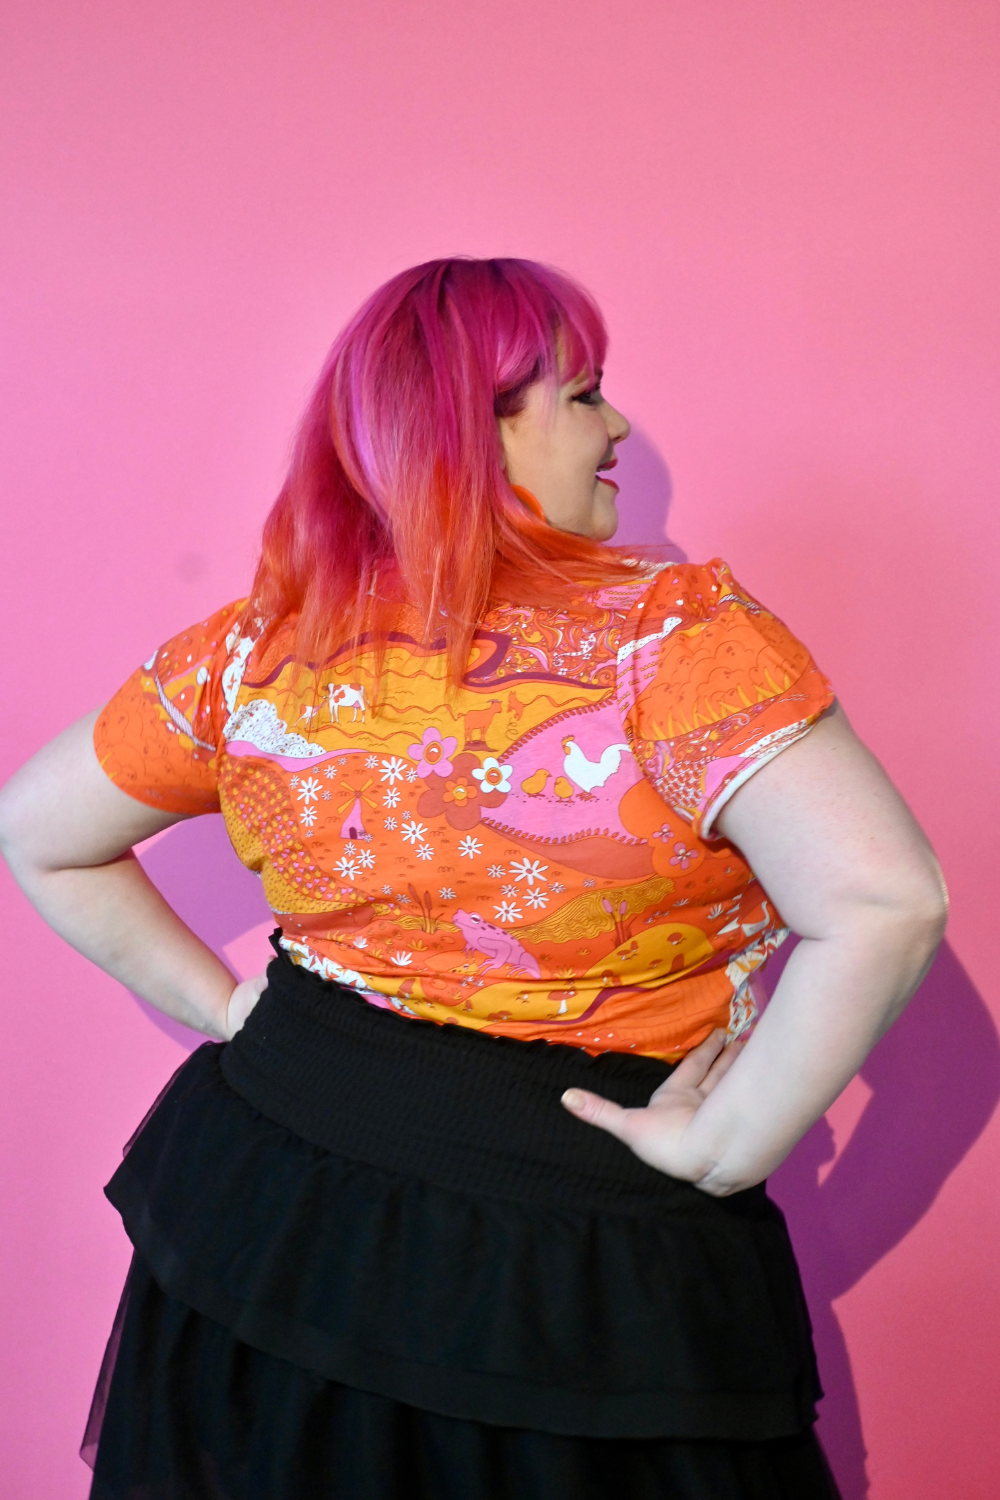 Back view of pink haired model wearing shirt with graphic of a landscape in orange and pink